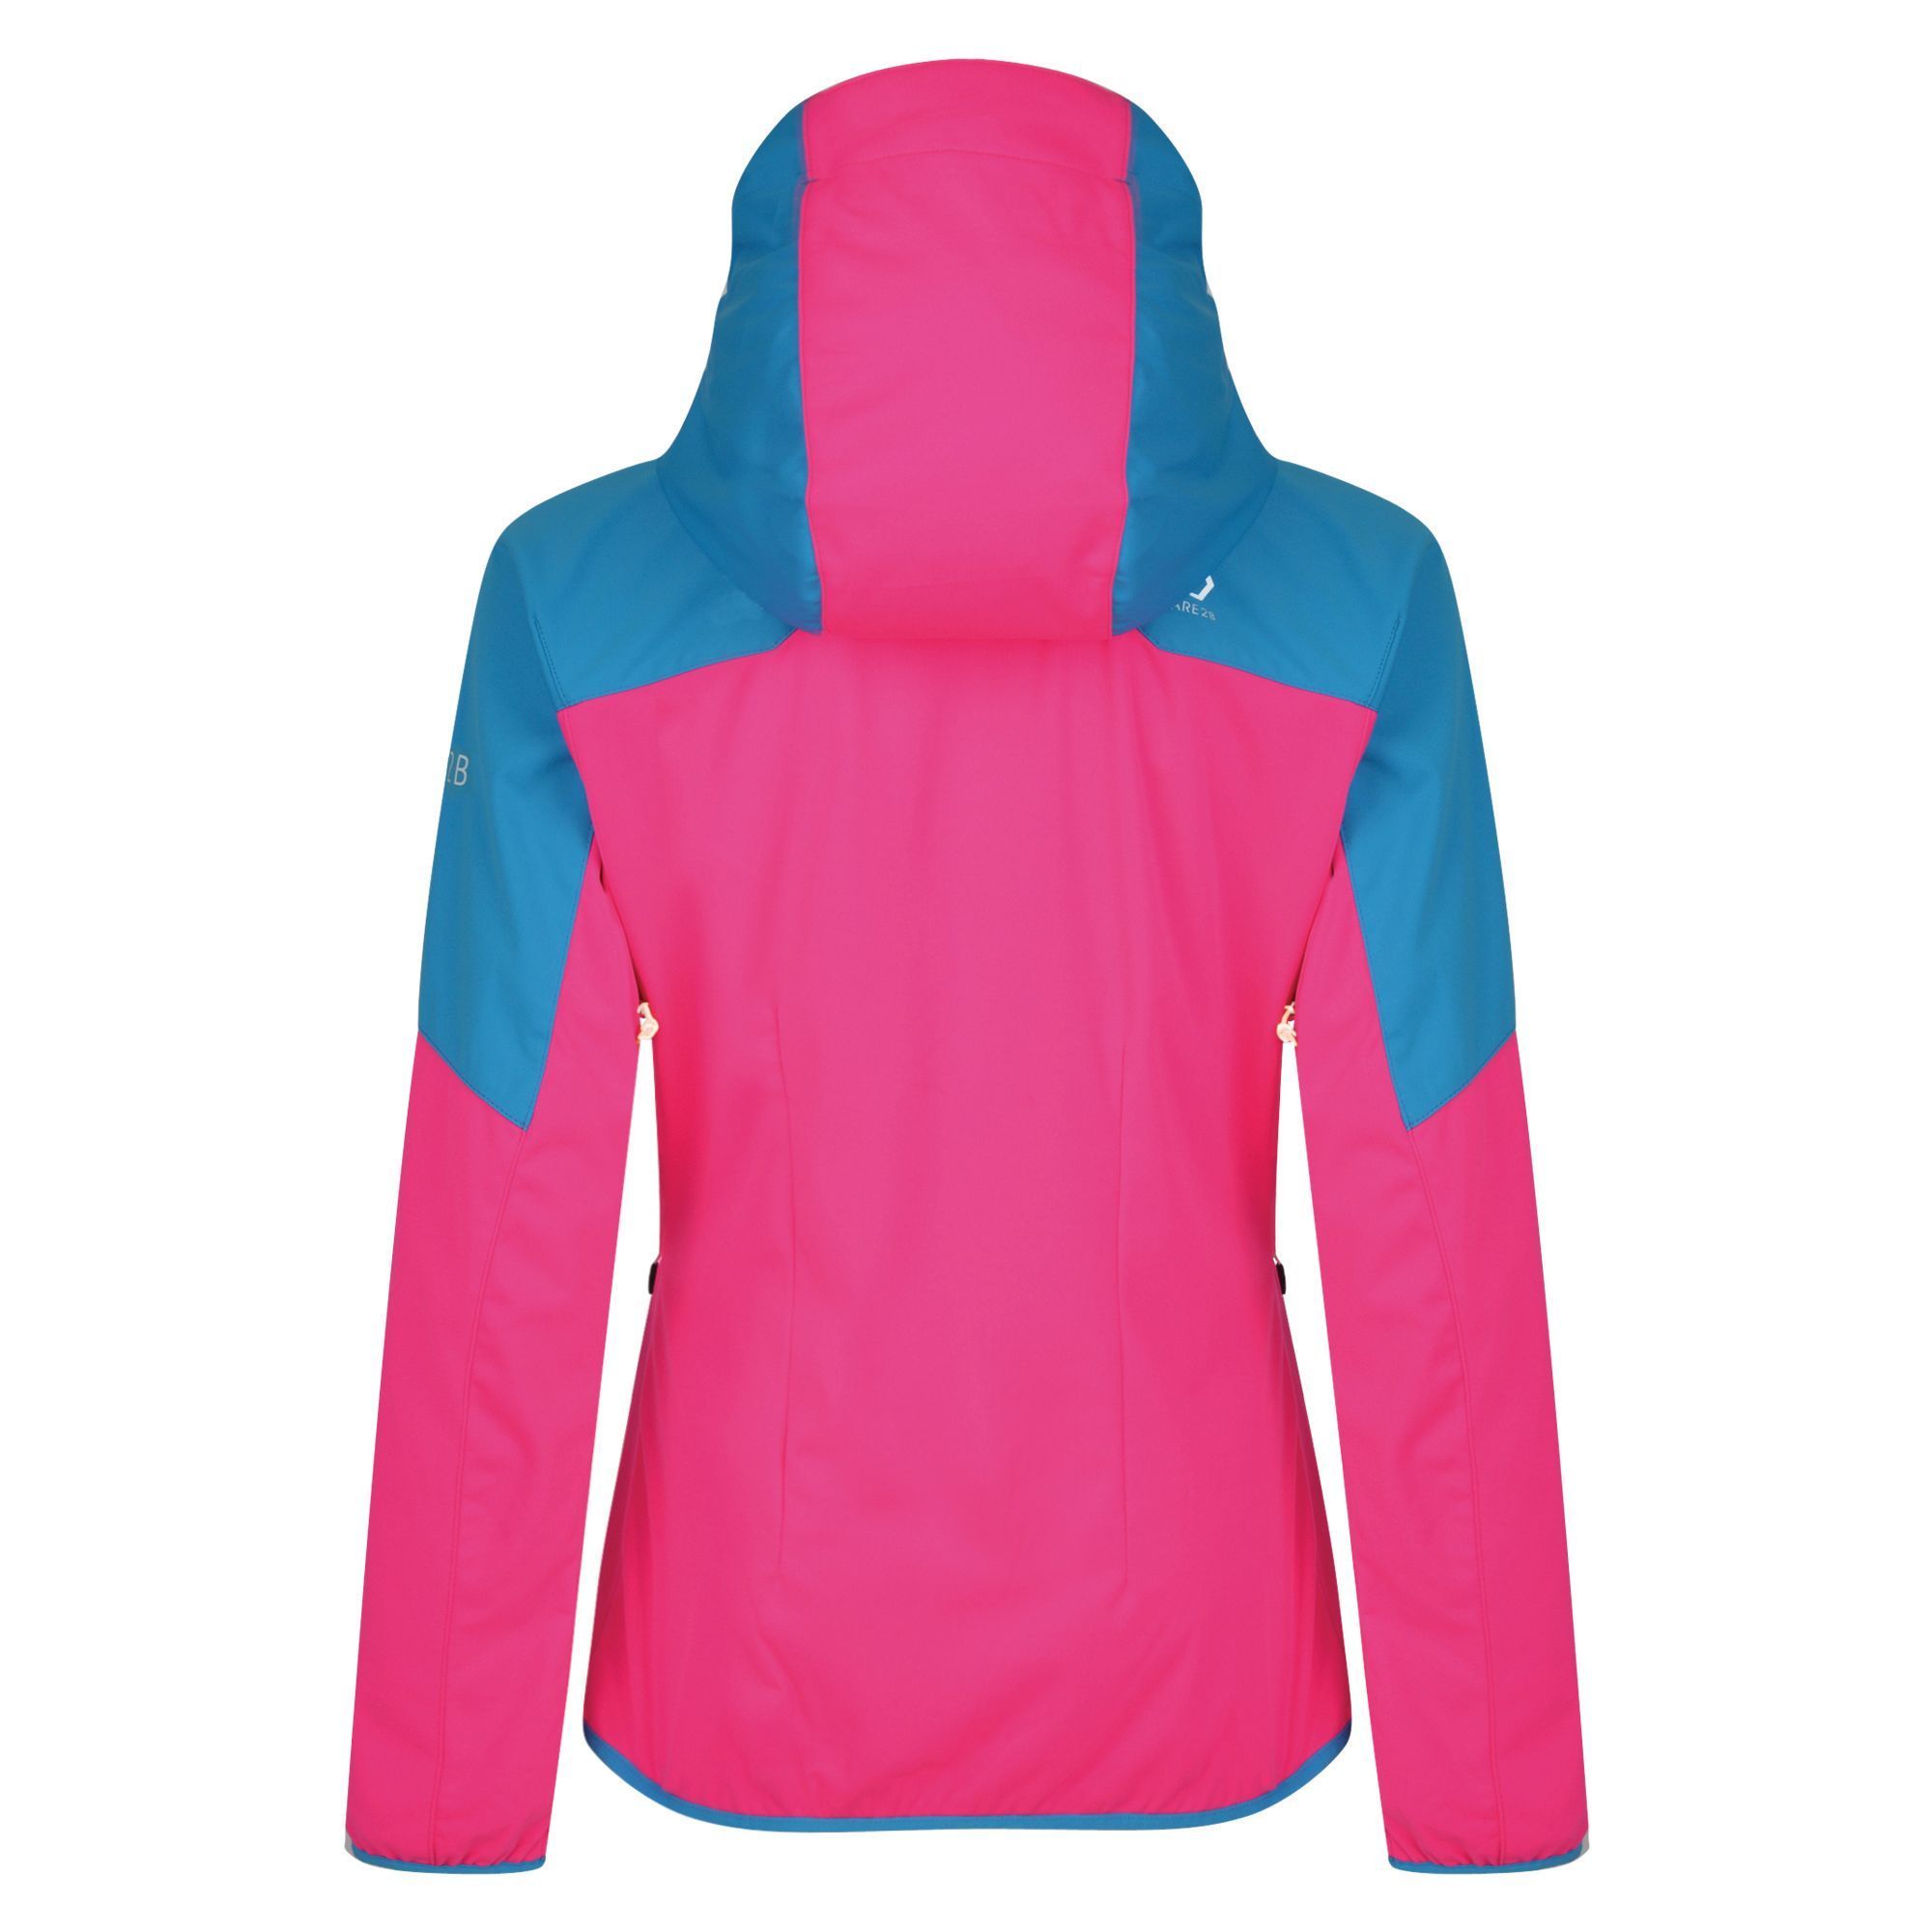 100% polyester Softshell fabric. AEP Kinematics. Seamsmart technology. Waterproof up to 5,000mm/ Breathability rating 5,000/m2/24hrs. Detachable performance fit technical hood with adjusters. Underarm ventilation zips. Articulated sleeves for enhanced range of movement. Stretch binding to cuffs and hem. 1 x zipped chest pocket and 2 x zipped lower pockets. Headphone port to inner pocket bag.